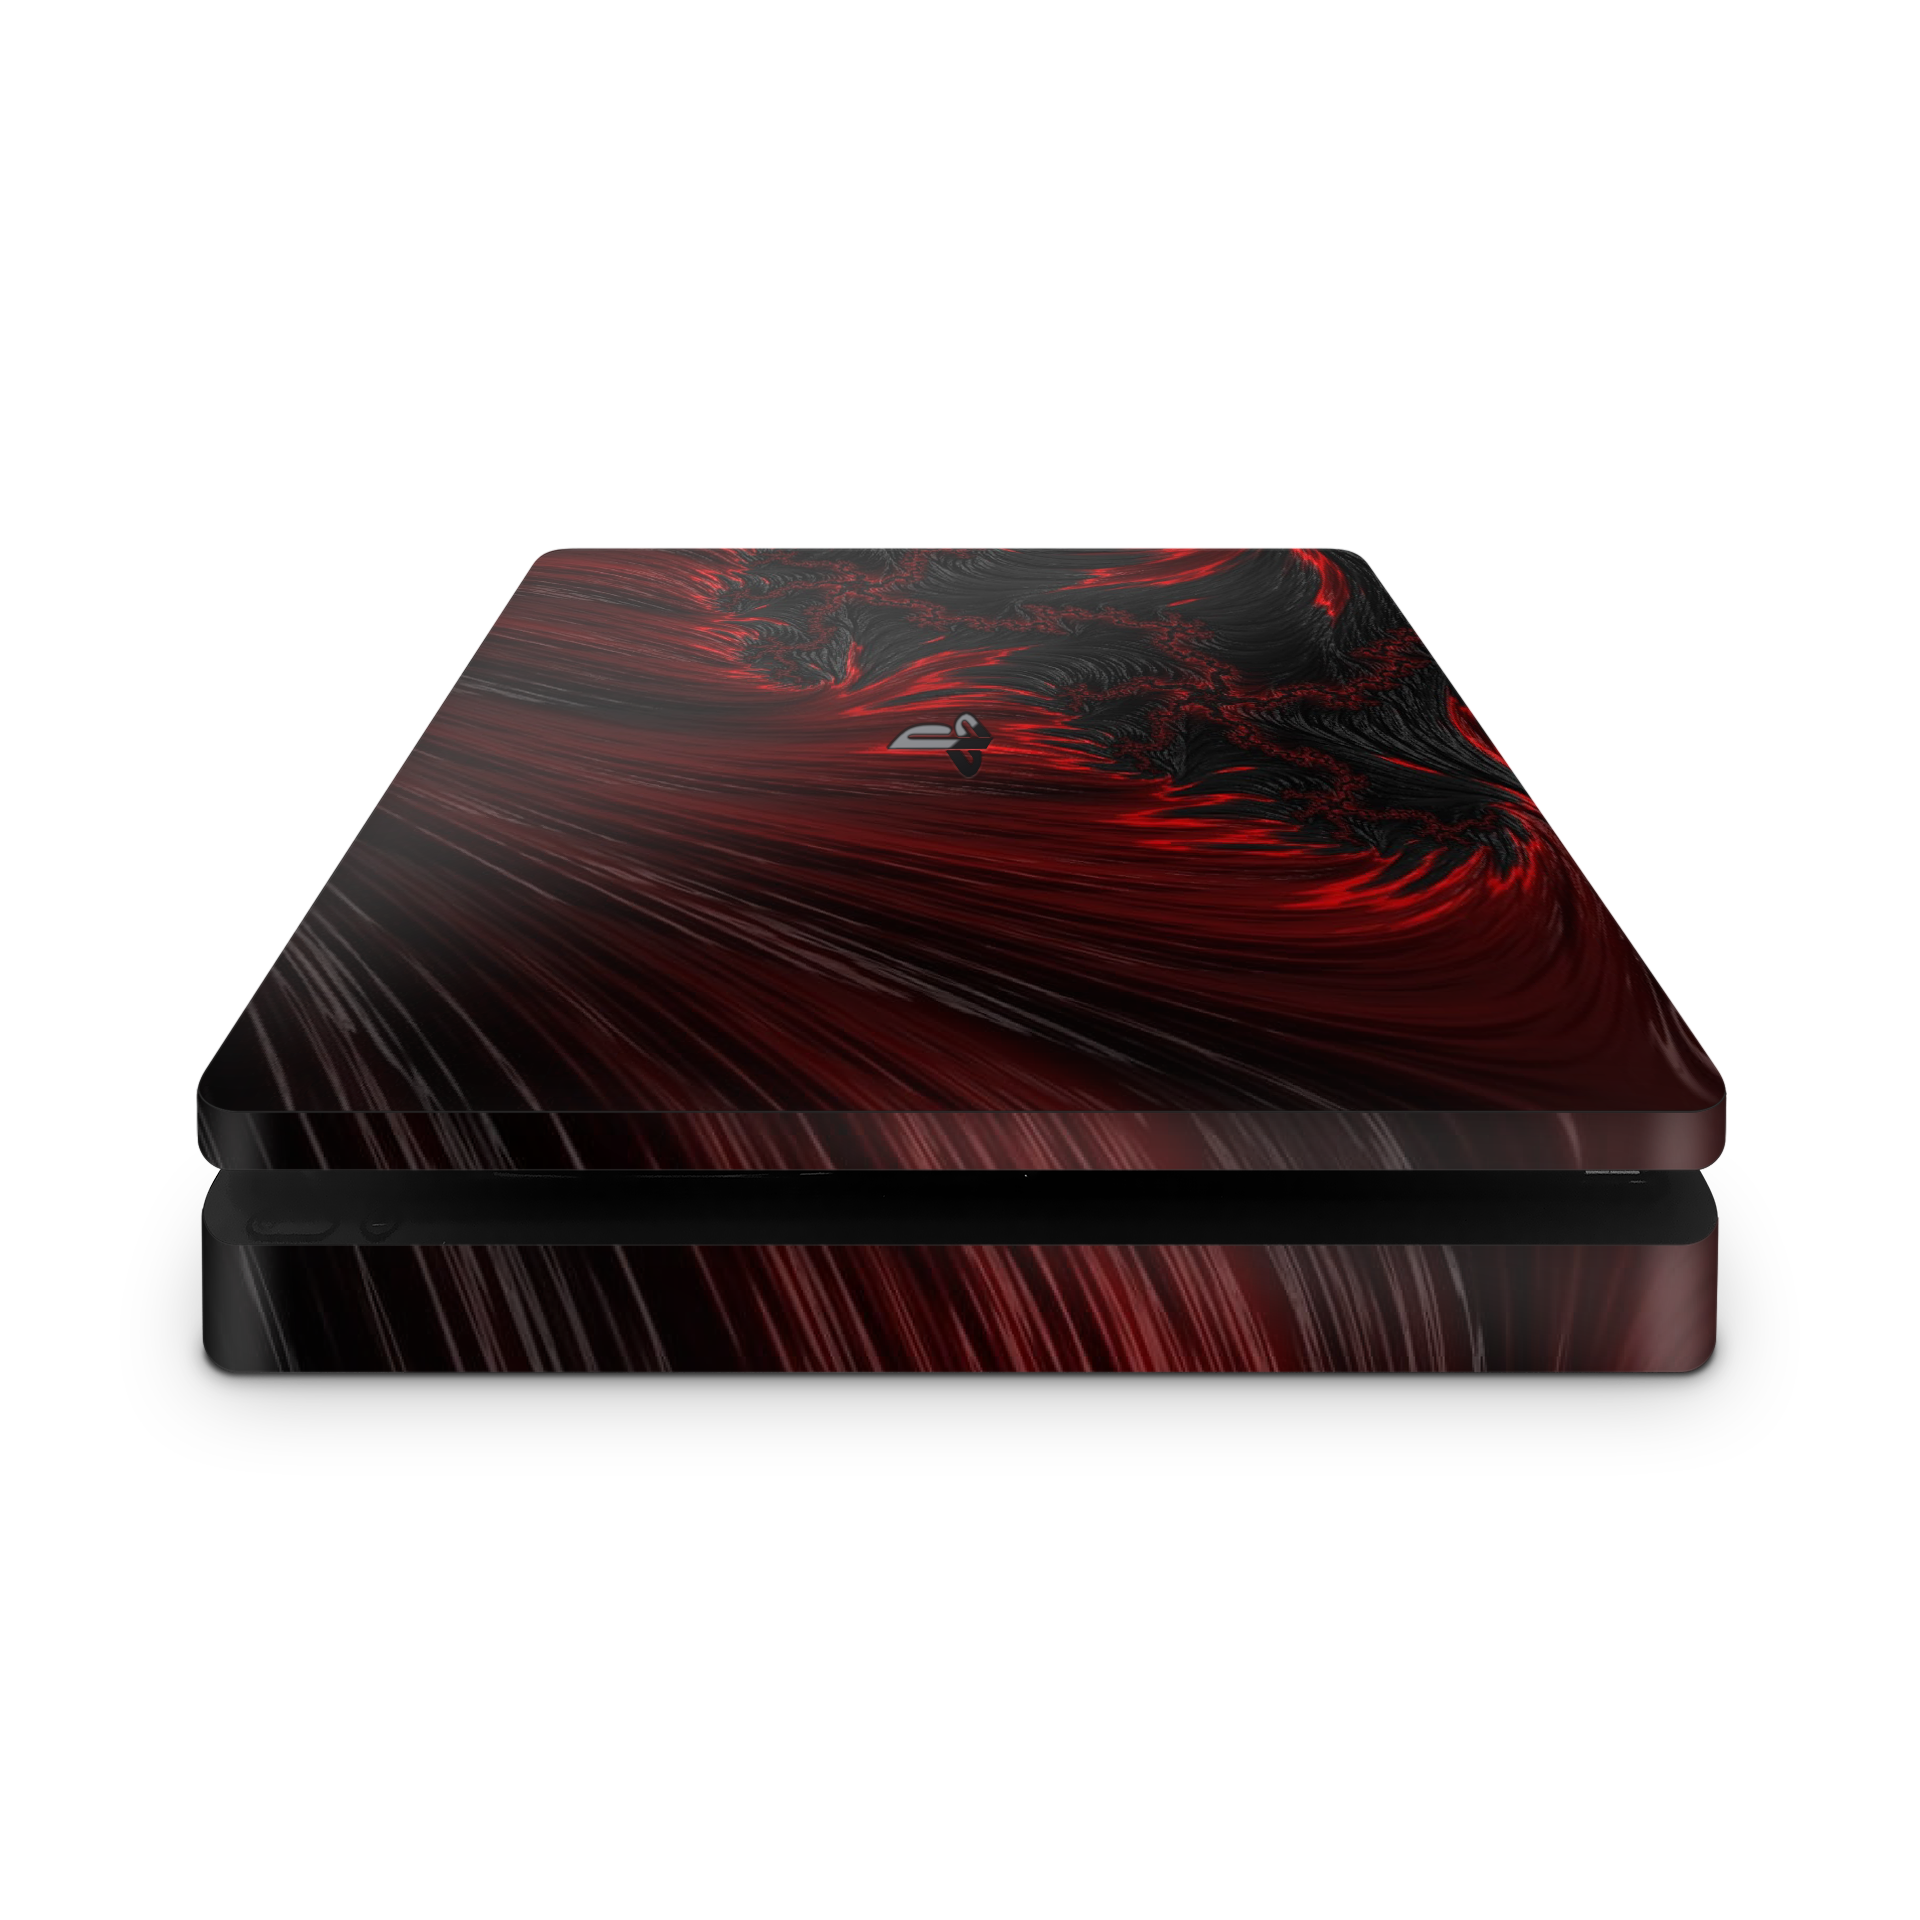 Hell's Edge - PS4 Slim Console Skin